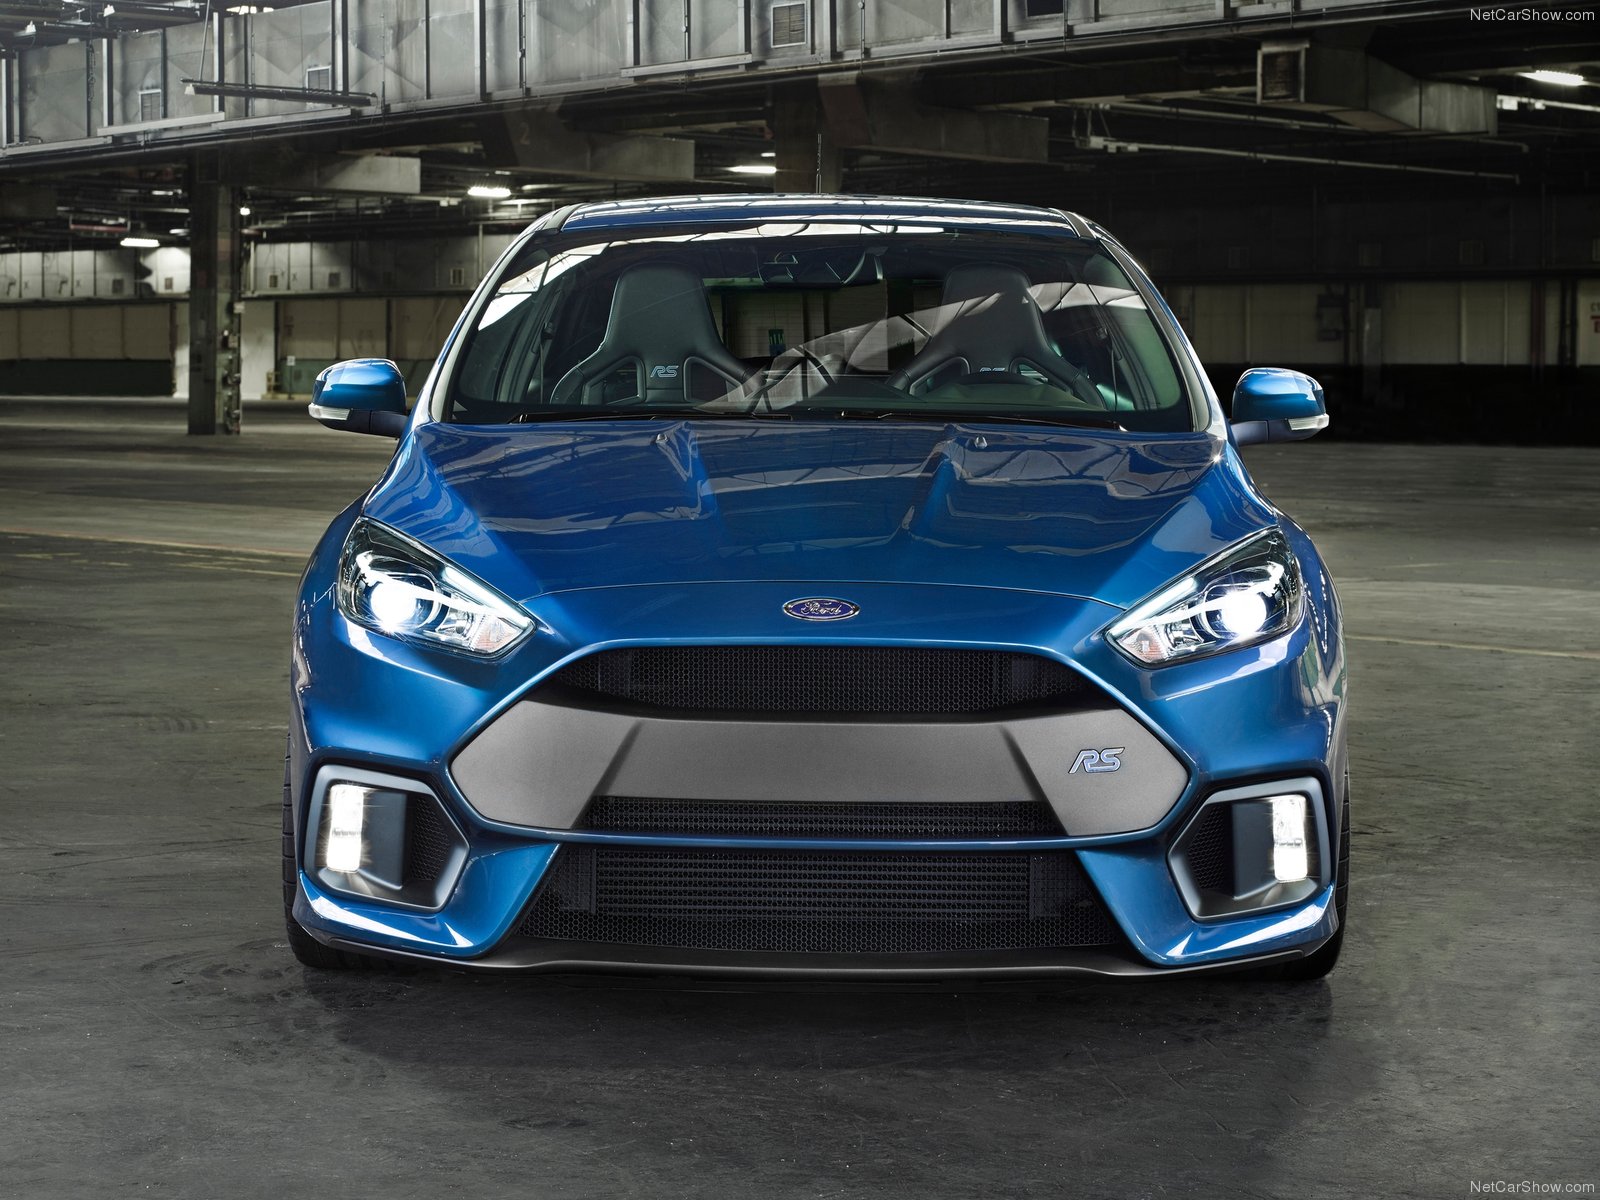 Ford Focus RS 2016 - Voiture Sportive | Ford FR